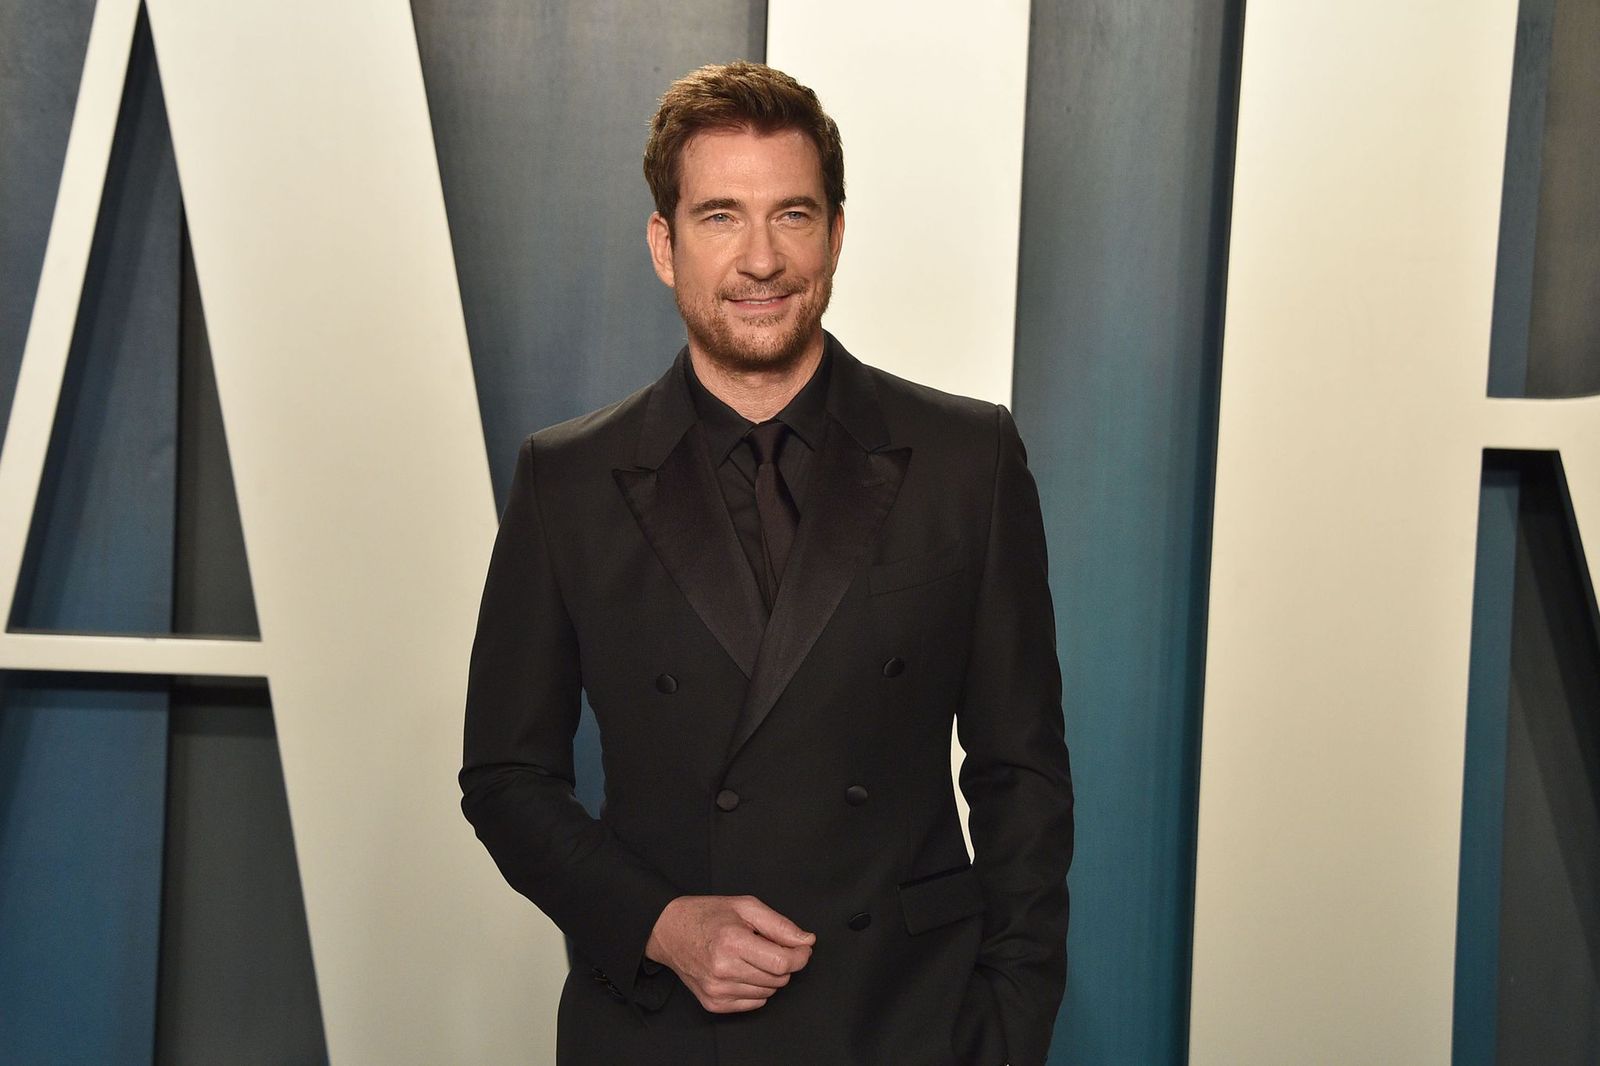 Dylan McDermott at the Vanity Fair Oscar Party on February 09, 2020, in Beverly Hills, California | Photo: David Crotty/Patrick McMullan/Getty Images